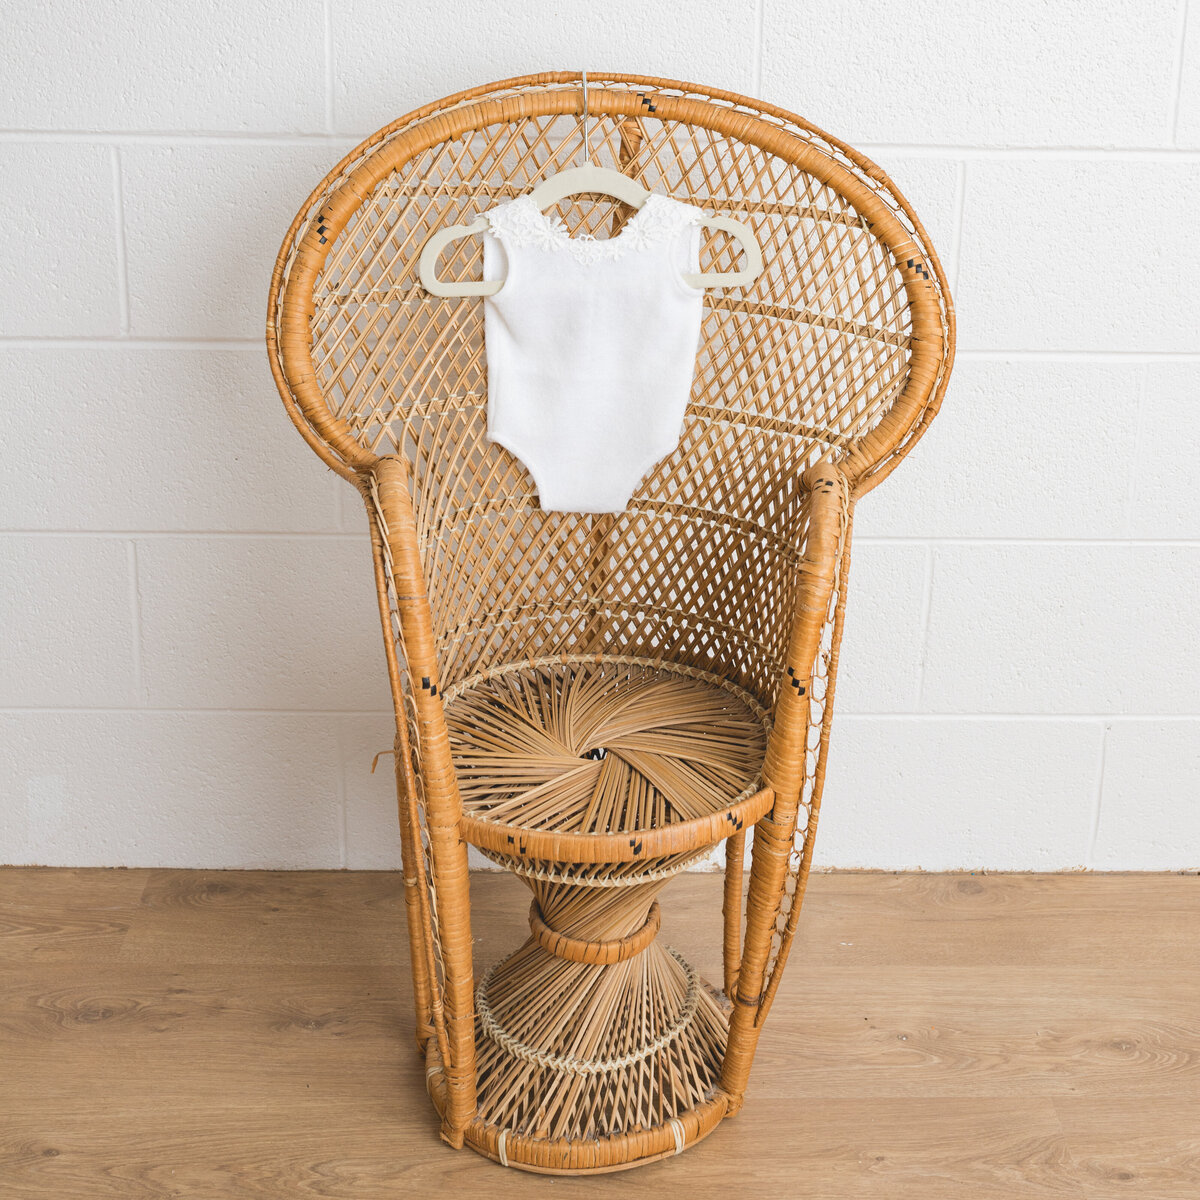 Image depicts a miniature peacock chair in a photography studio on the chair hangs a tiny newborn outfit in white knit with embroidered flowers.  This image is a sample of Lauren Vanier Photography's newborn client wardrobe. Image taken in Hobart Tasmania.